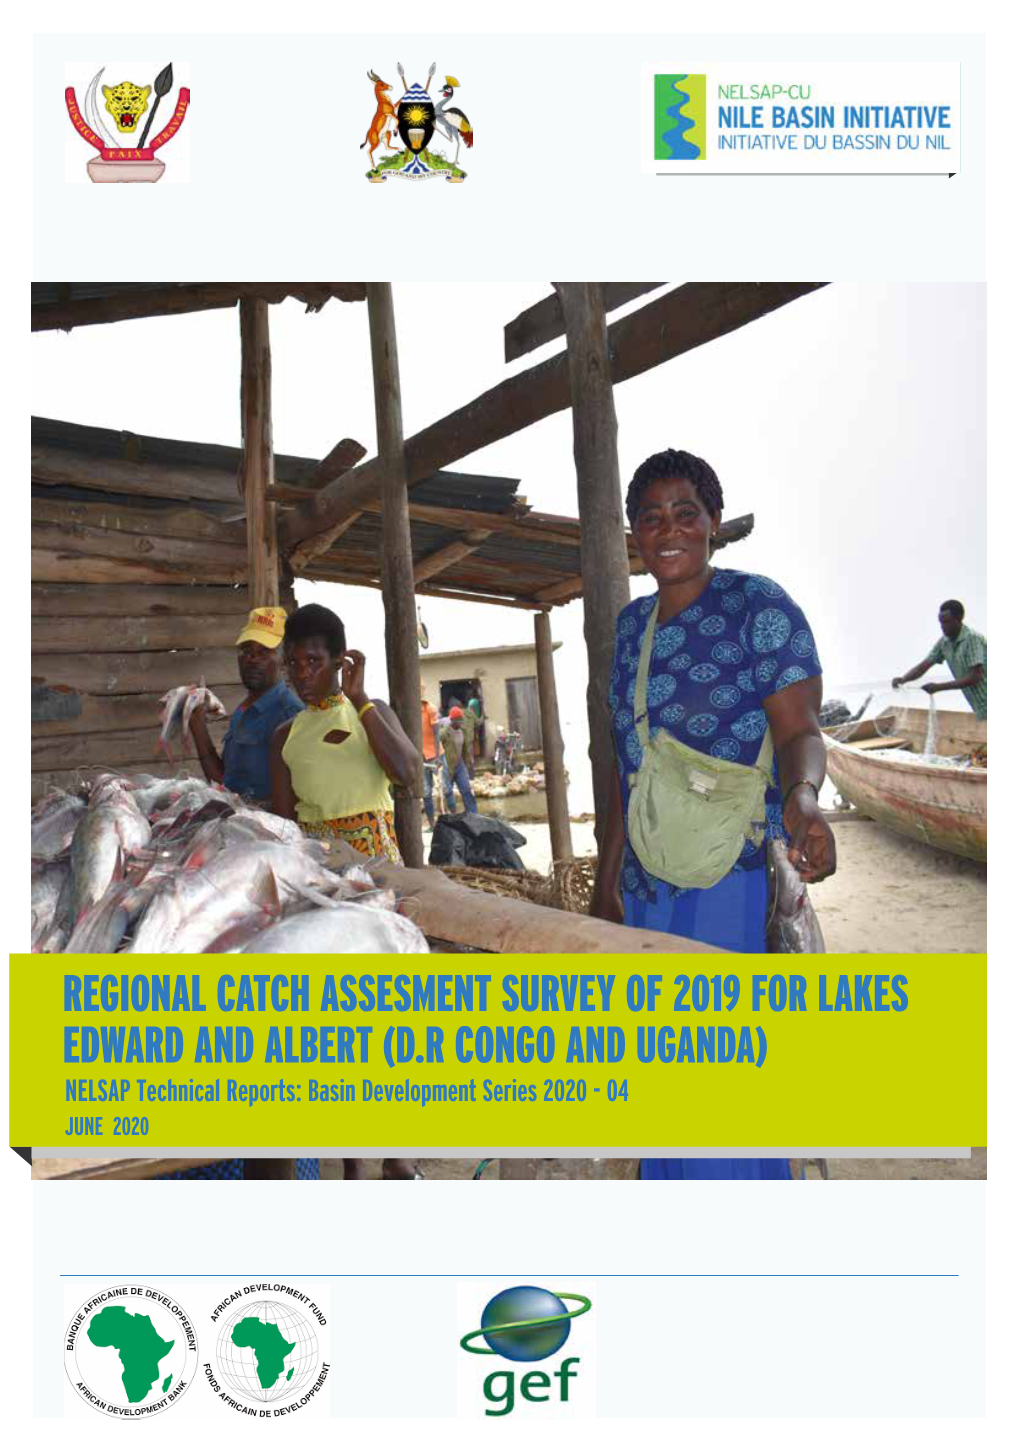 Regional Catch Assesment Survey of 2019 for Lakes Edward and Albert (D.R Congo and Uganda)